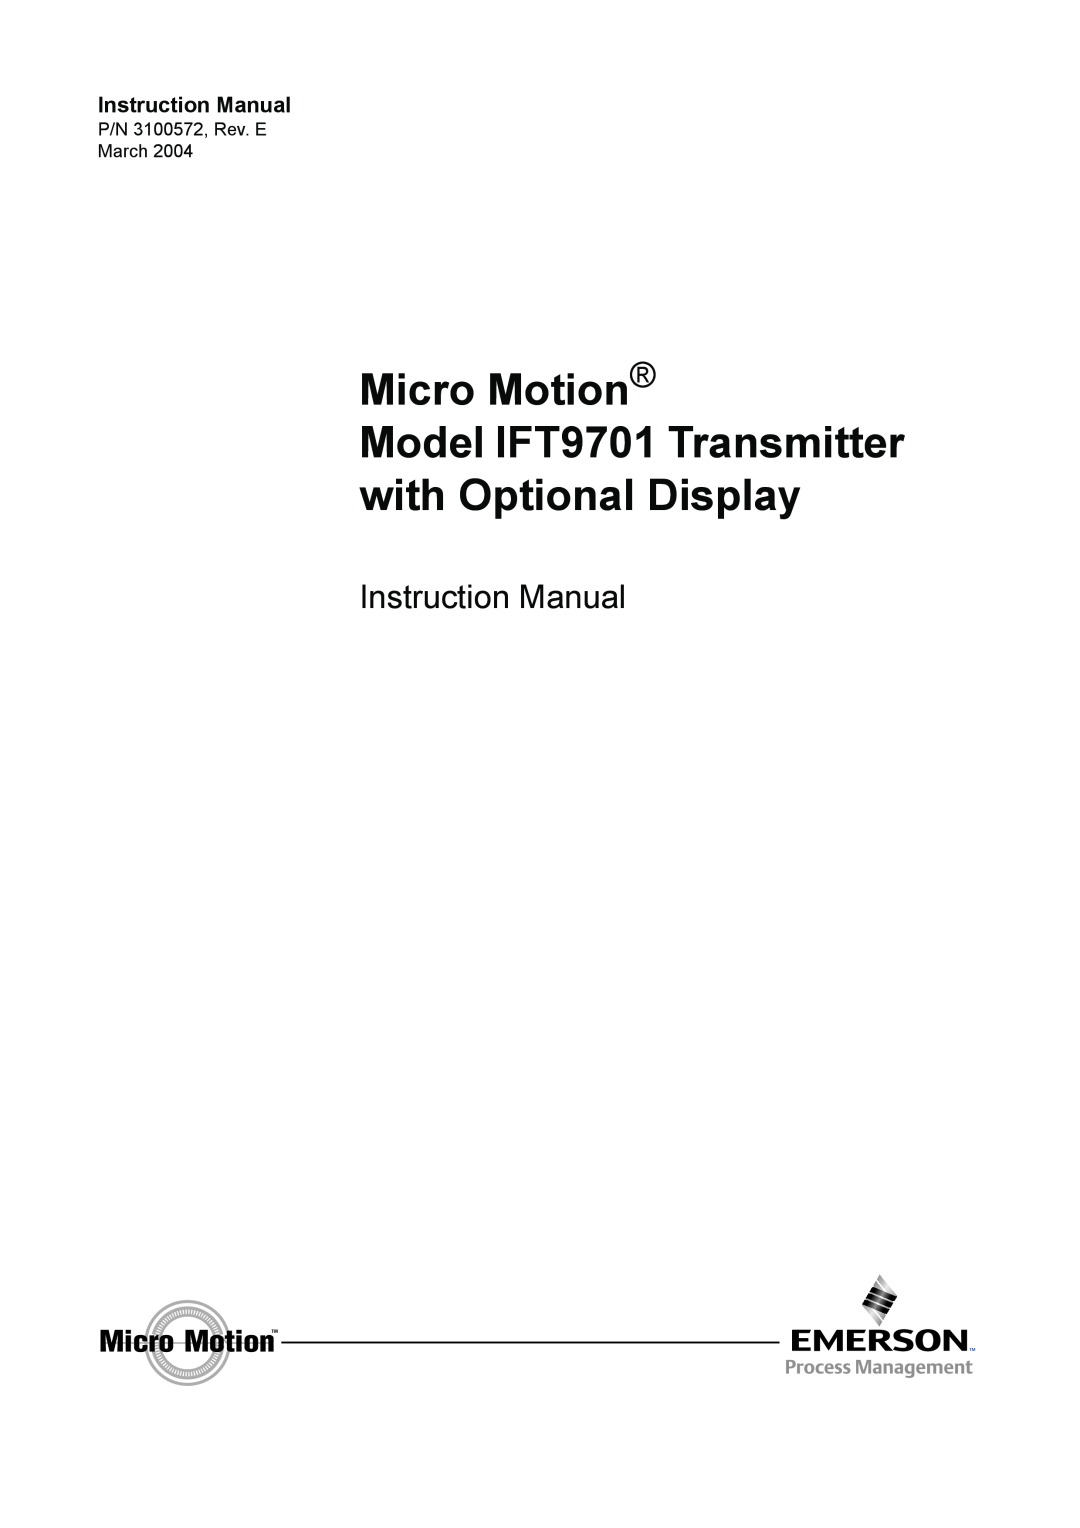 Emerson instruction manual Model IFT9701 Transmitter with Optional Display, Micro MotionTM 